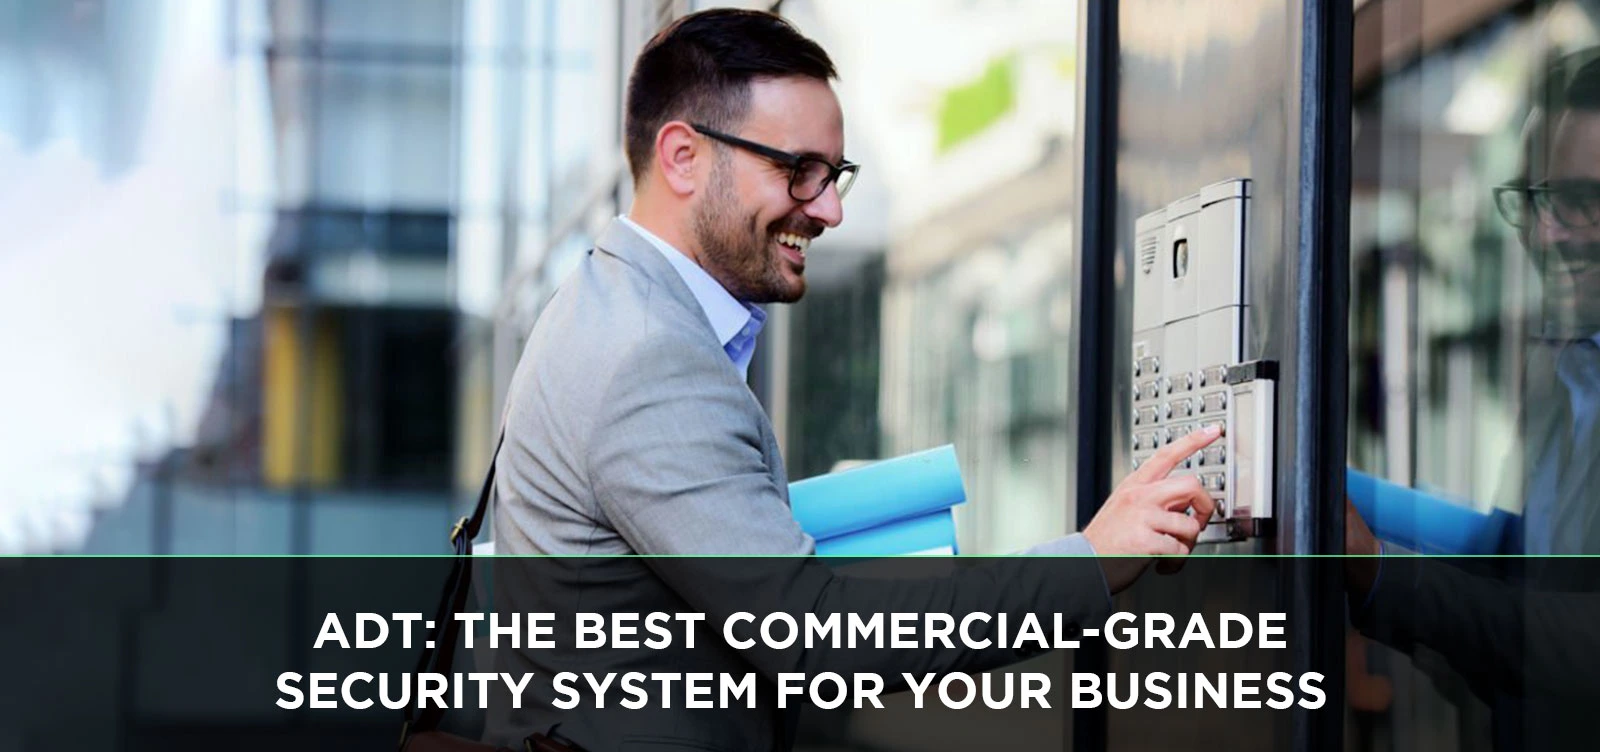 ADT: The Best Commercial-Grade Security System for Your Business